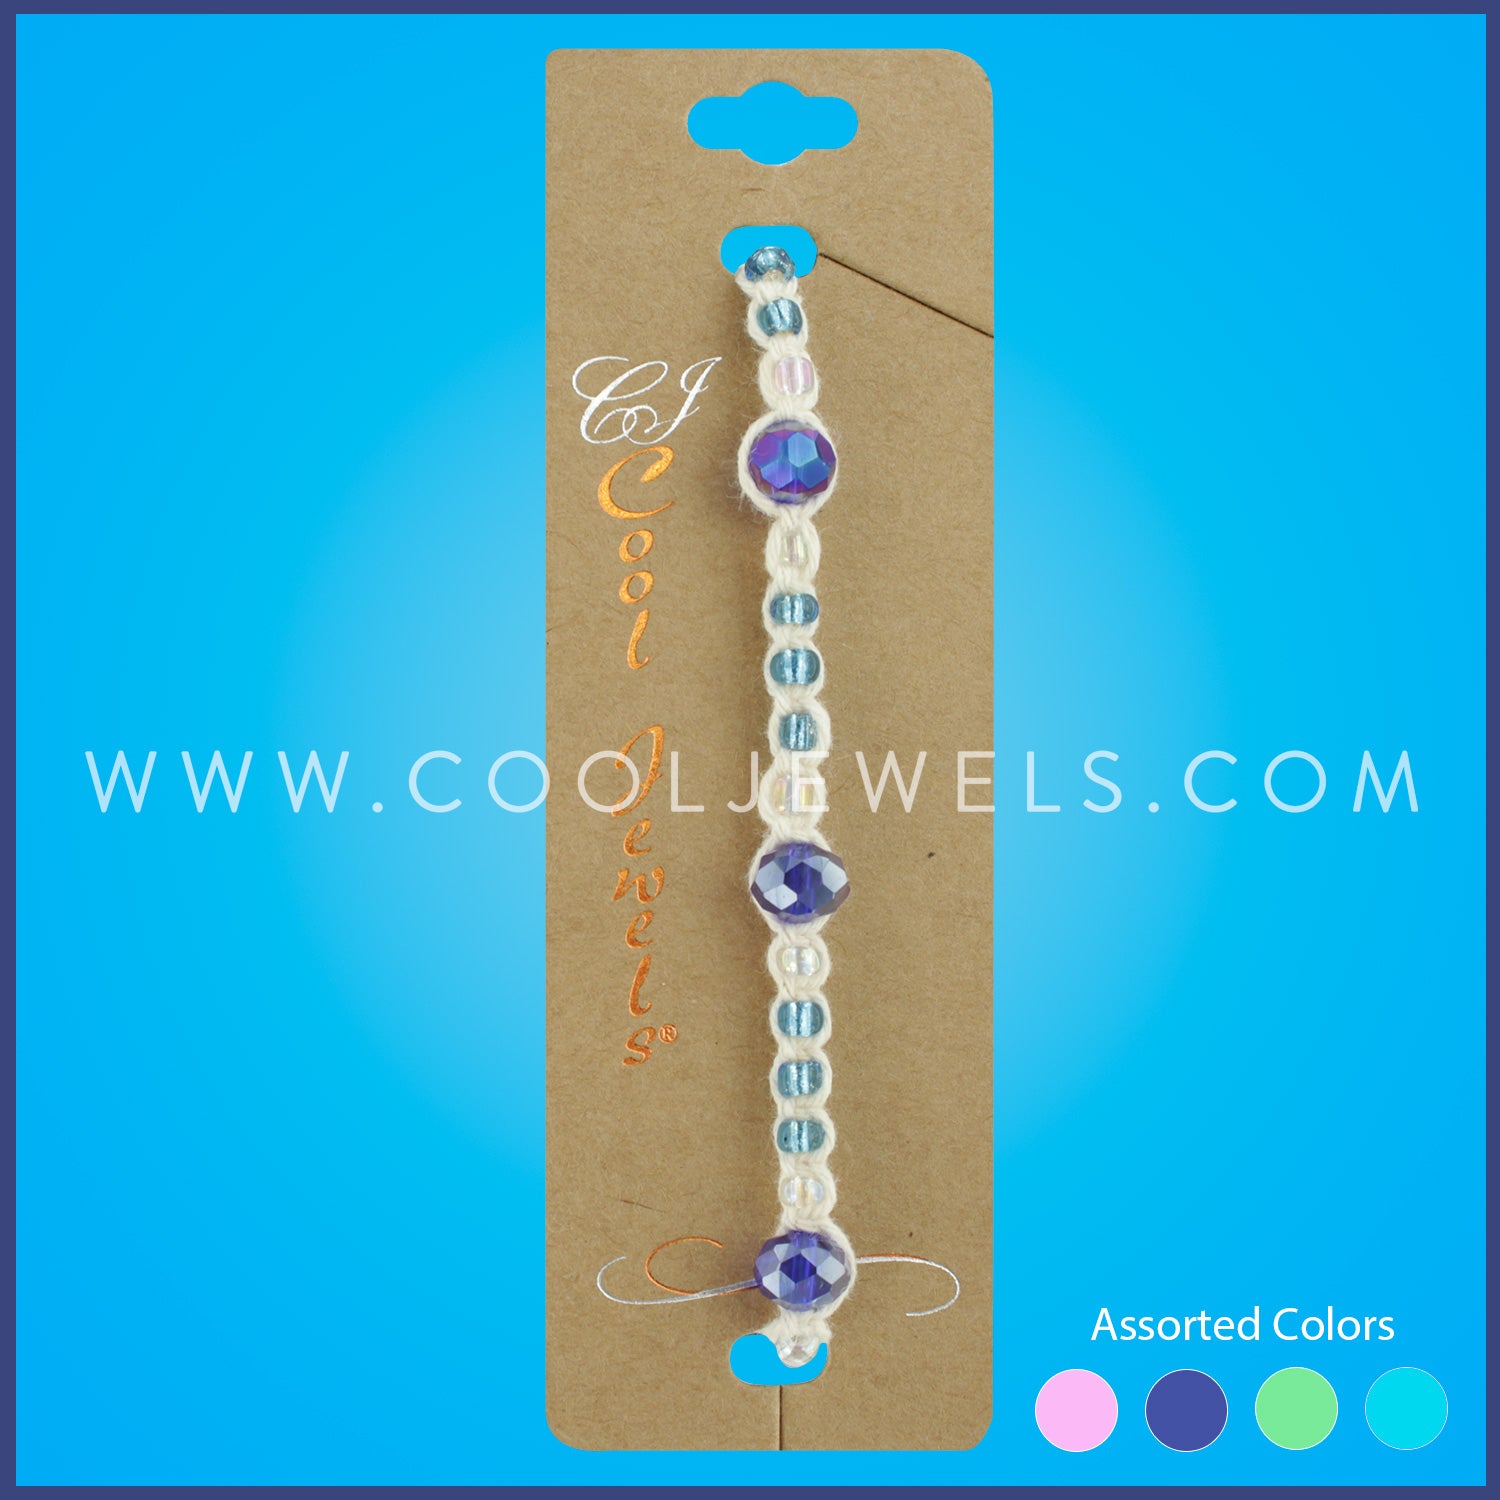 HEMP BRACELET ANKLET WITH COLORED BEADS - ASSORTED COLORS